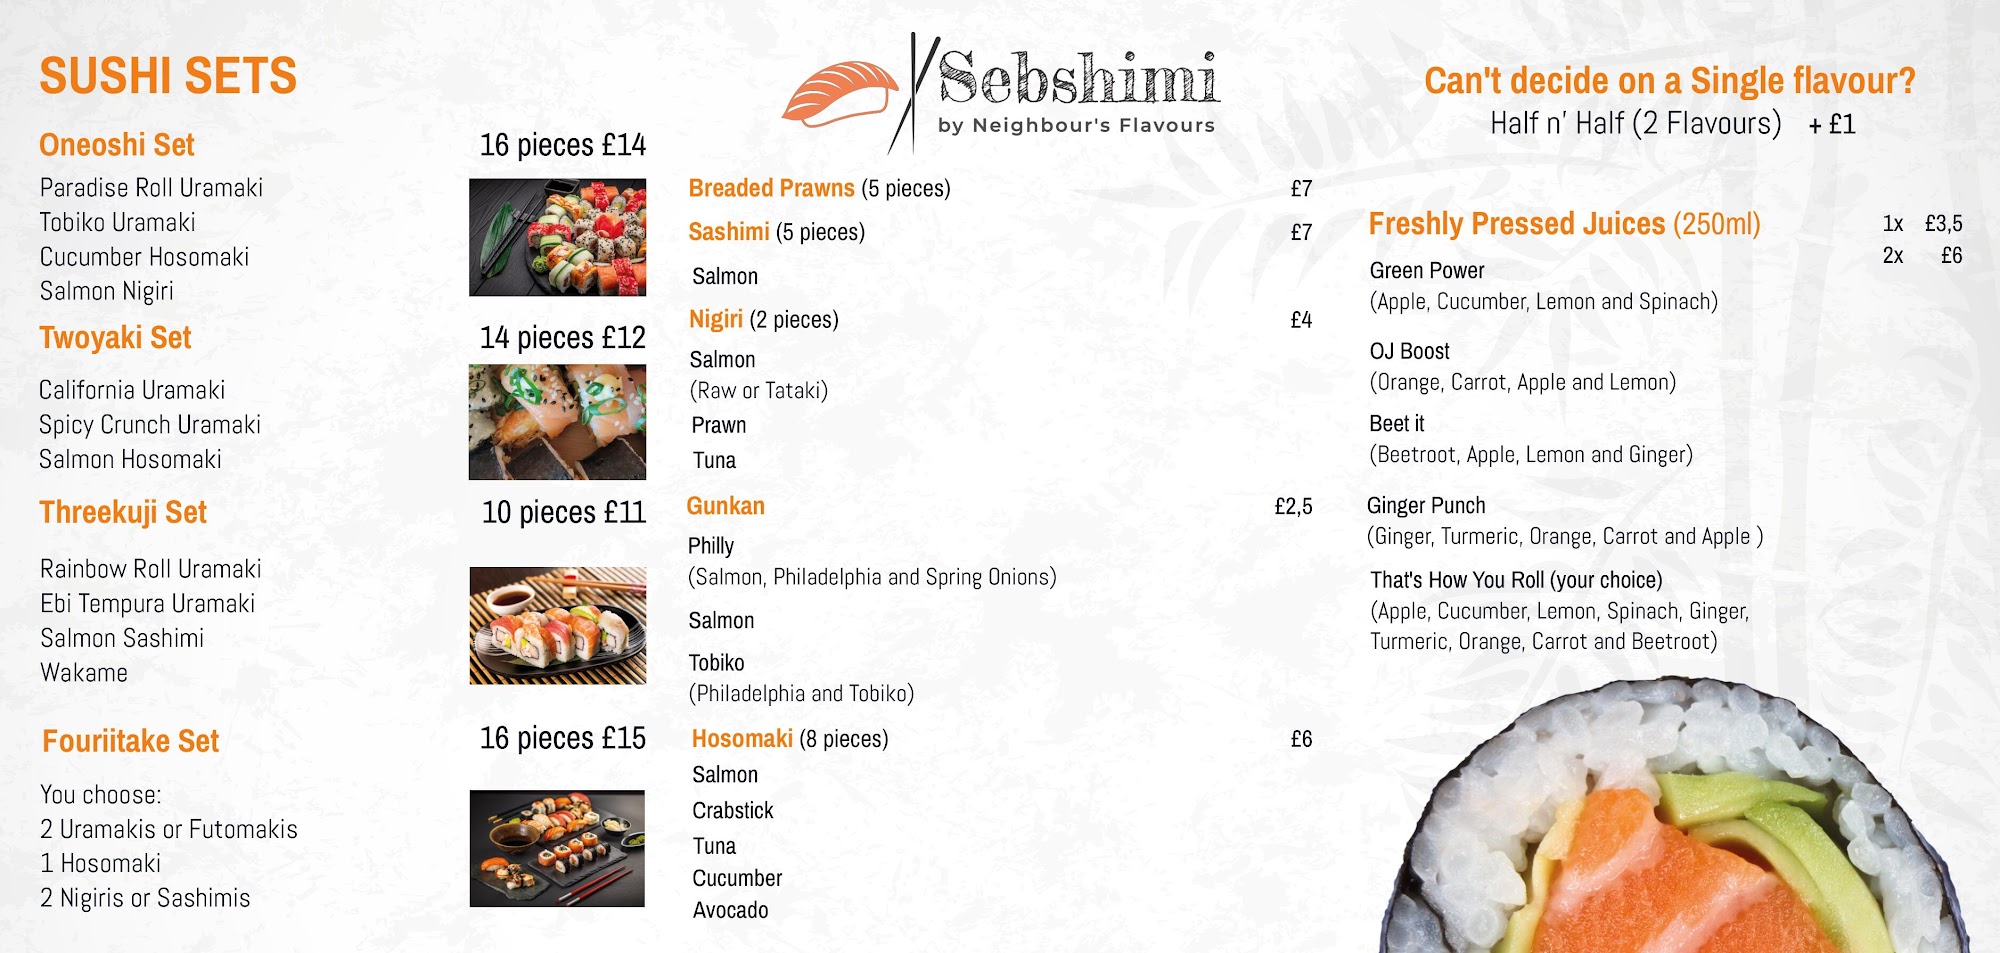 Sebshimi by Neighbour's Flavours